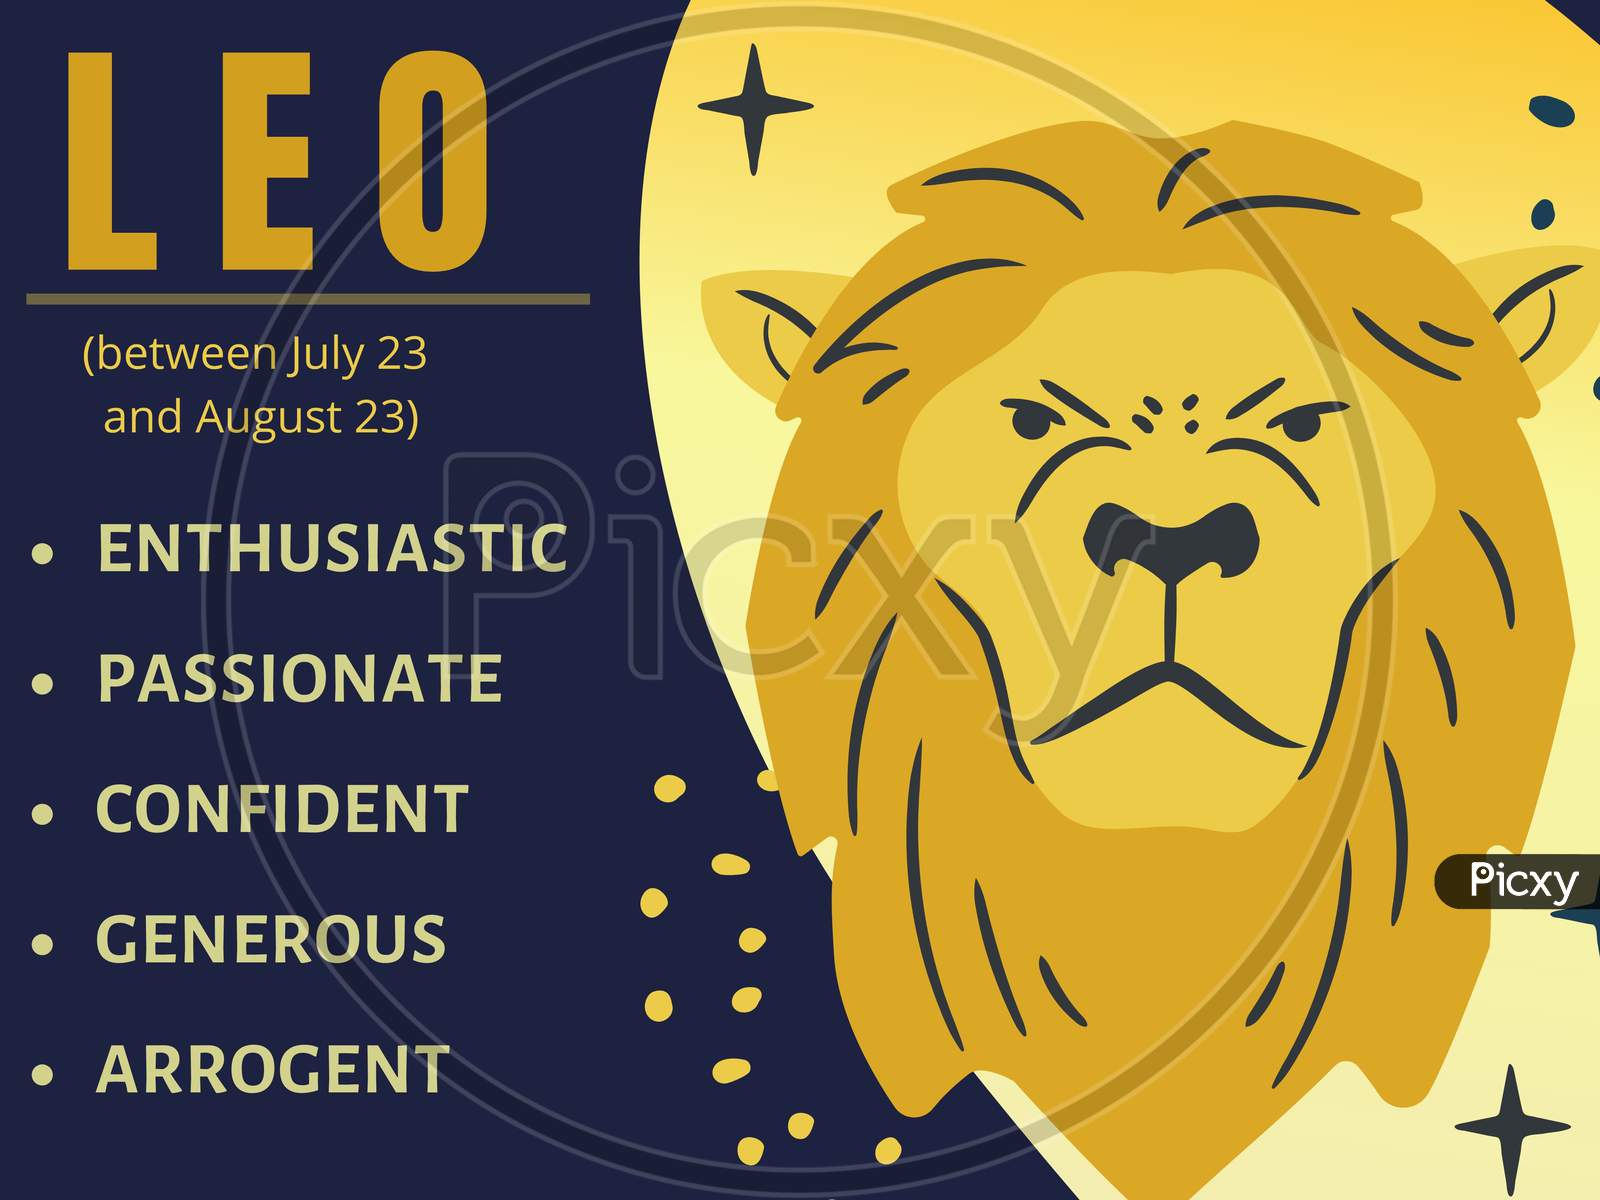 Download 4k Zodiac Leo Wallpaper by CozyPac  46  Free on ZEDGE now  Browse millions of popular lion Wallpape  Zodiac leo art Leo zodiac Wallpaper  backgrounds